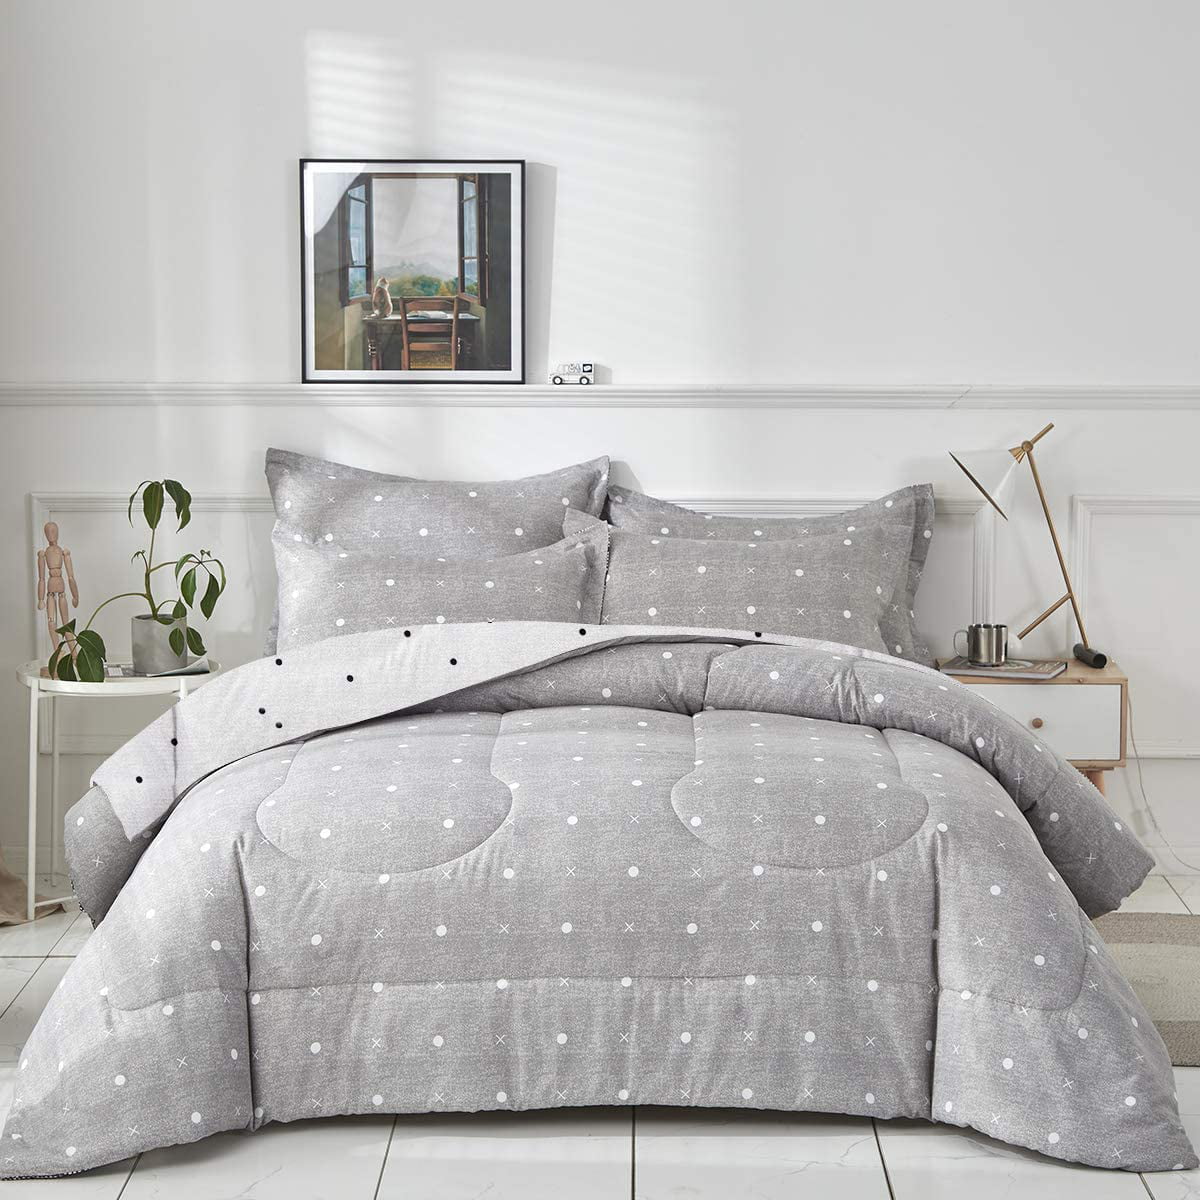 Details about   1000 Thread Count Egyptian Cotton Home Bedding Collection US Sizes Elephant Grey 